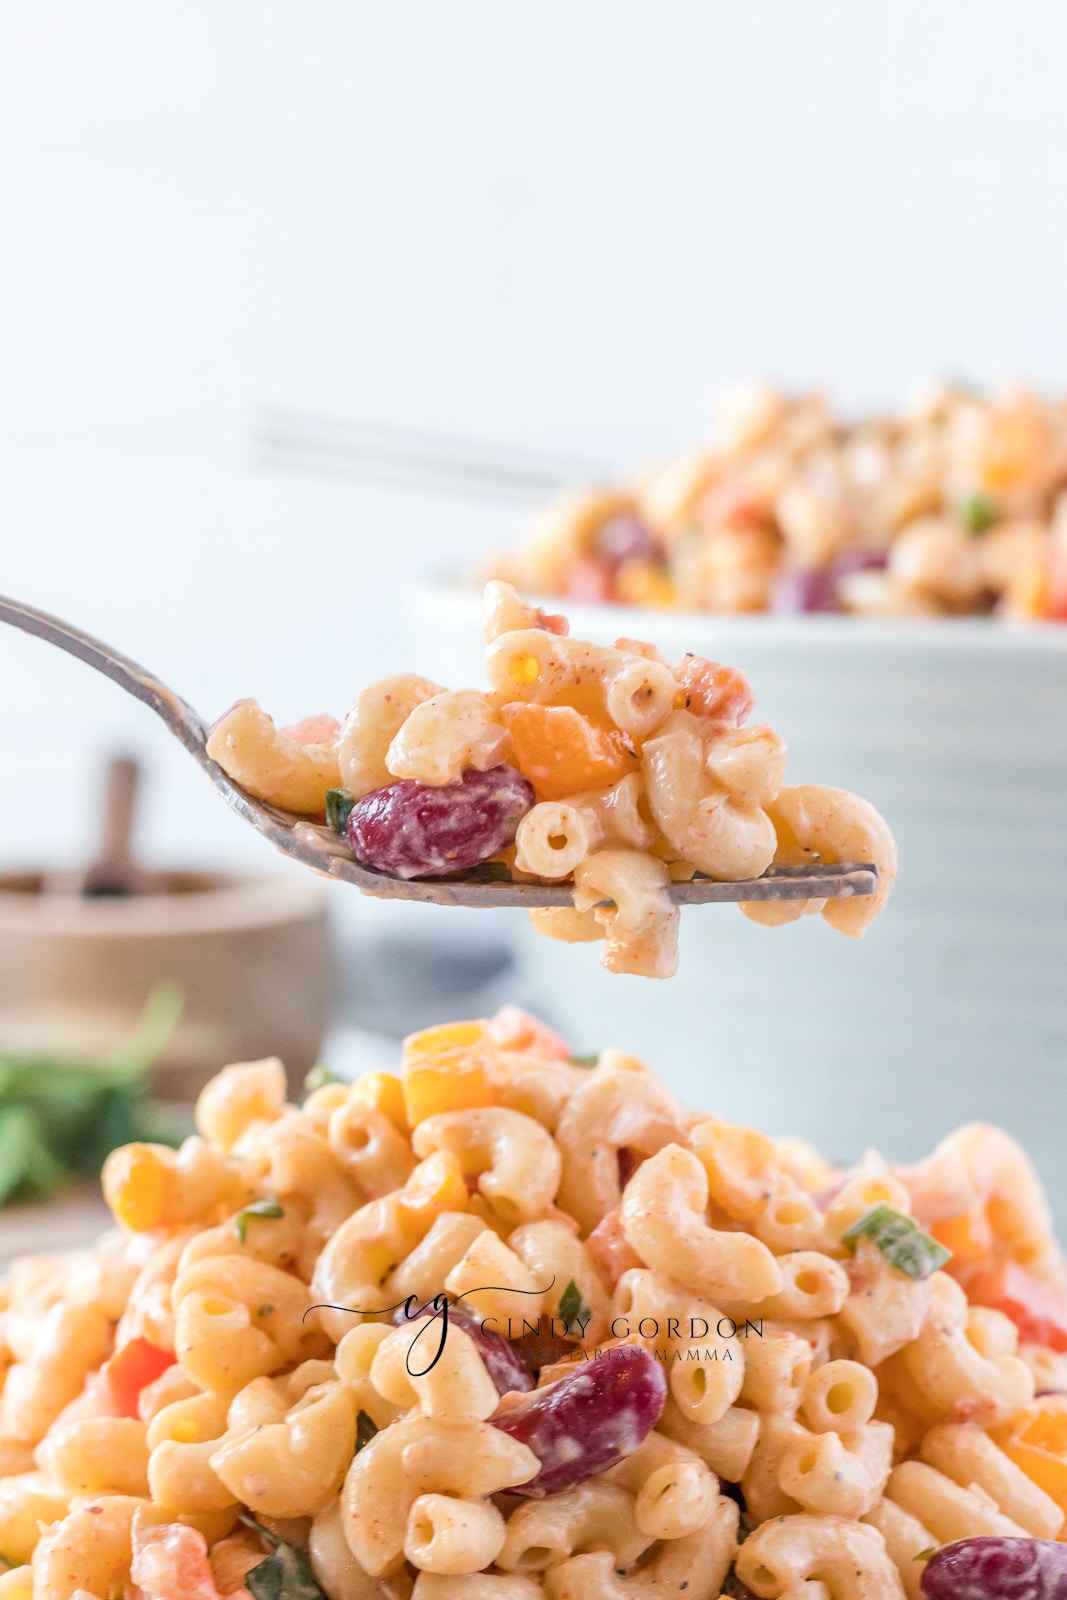 creamy macaroni salad with red, purple and green vegetables in it in a blue bowl fork with pasta salad on it